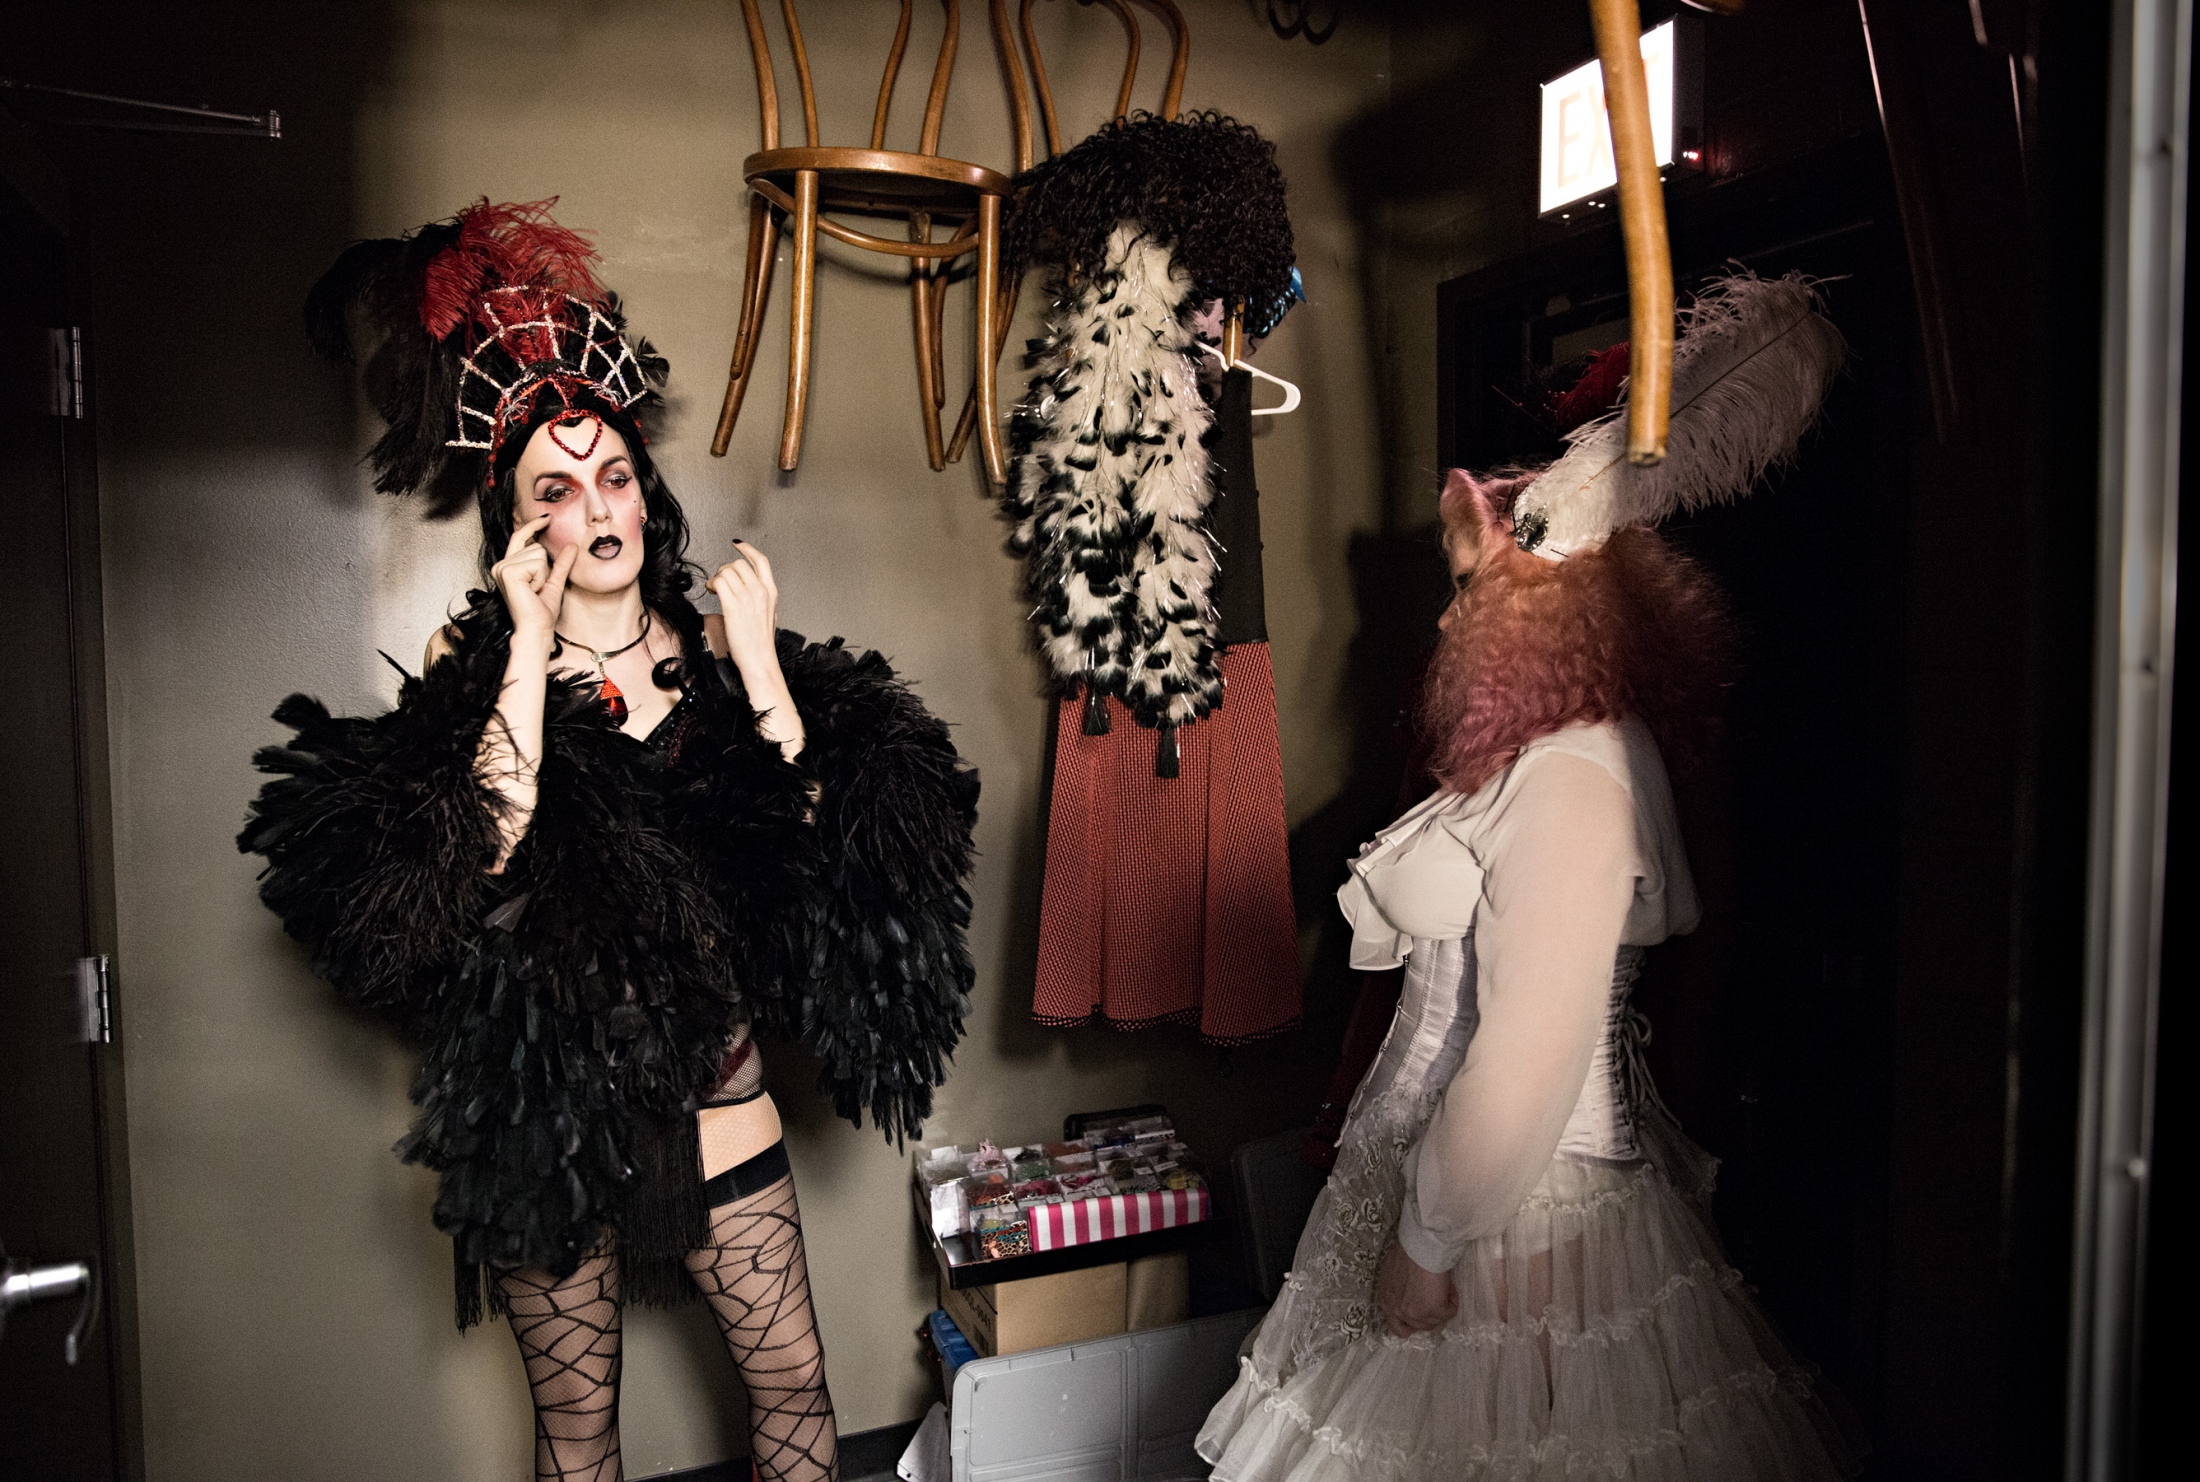 Red Hot Annie and Gin Fizz chat backstage during a show. Vaudezilla performers chat to reduce the performance anxiety that can build up during the wait between acts and waiting to be called to the stage.